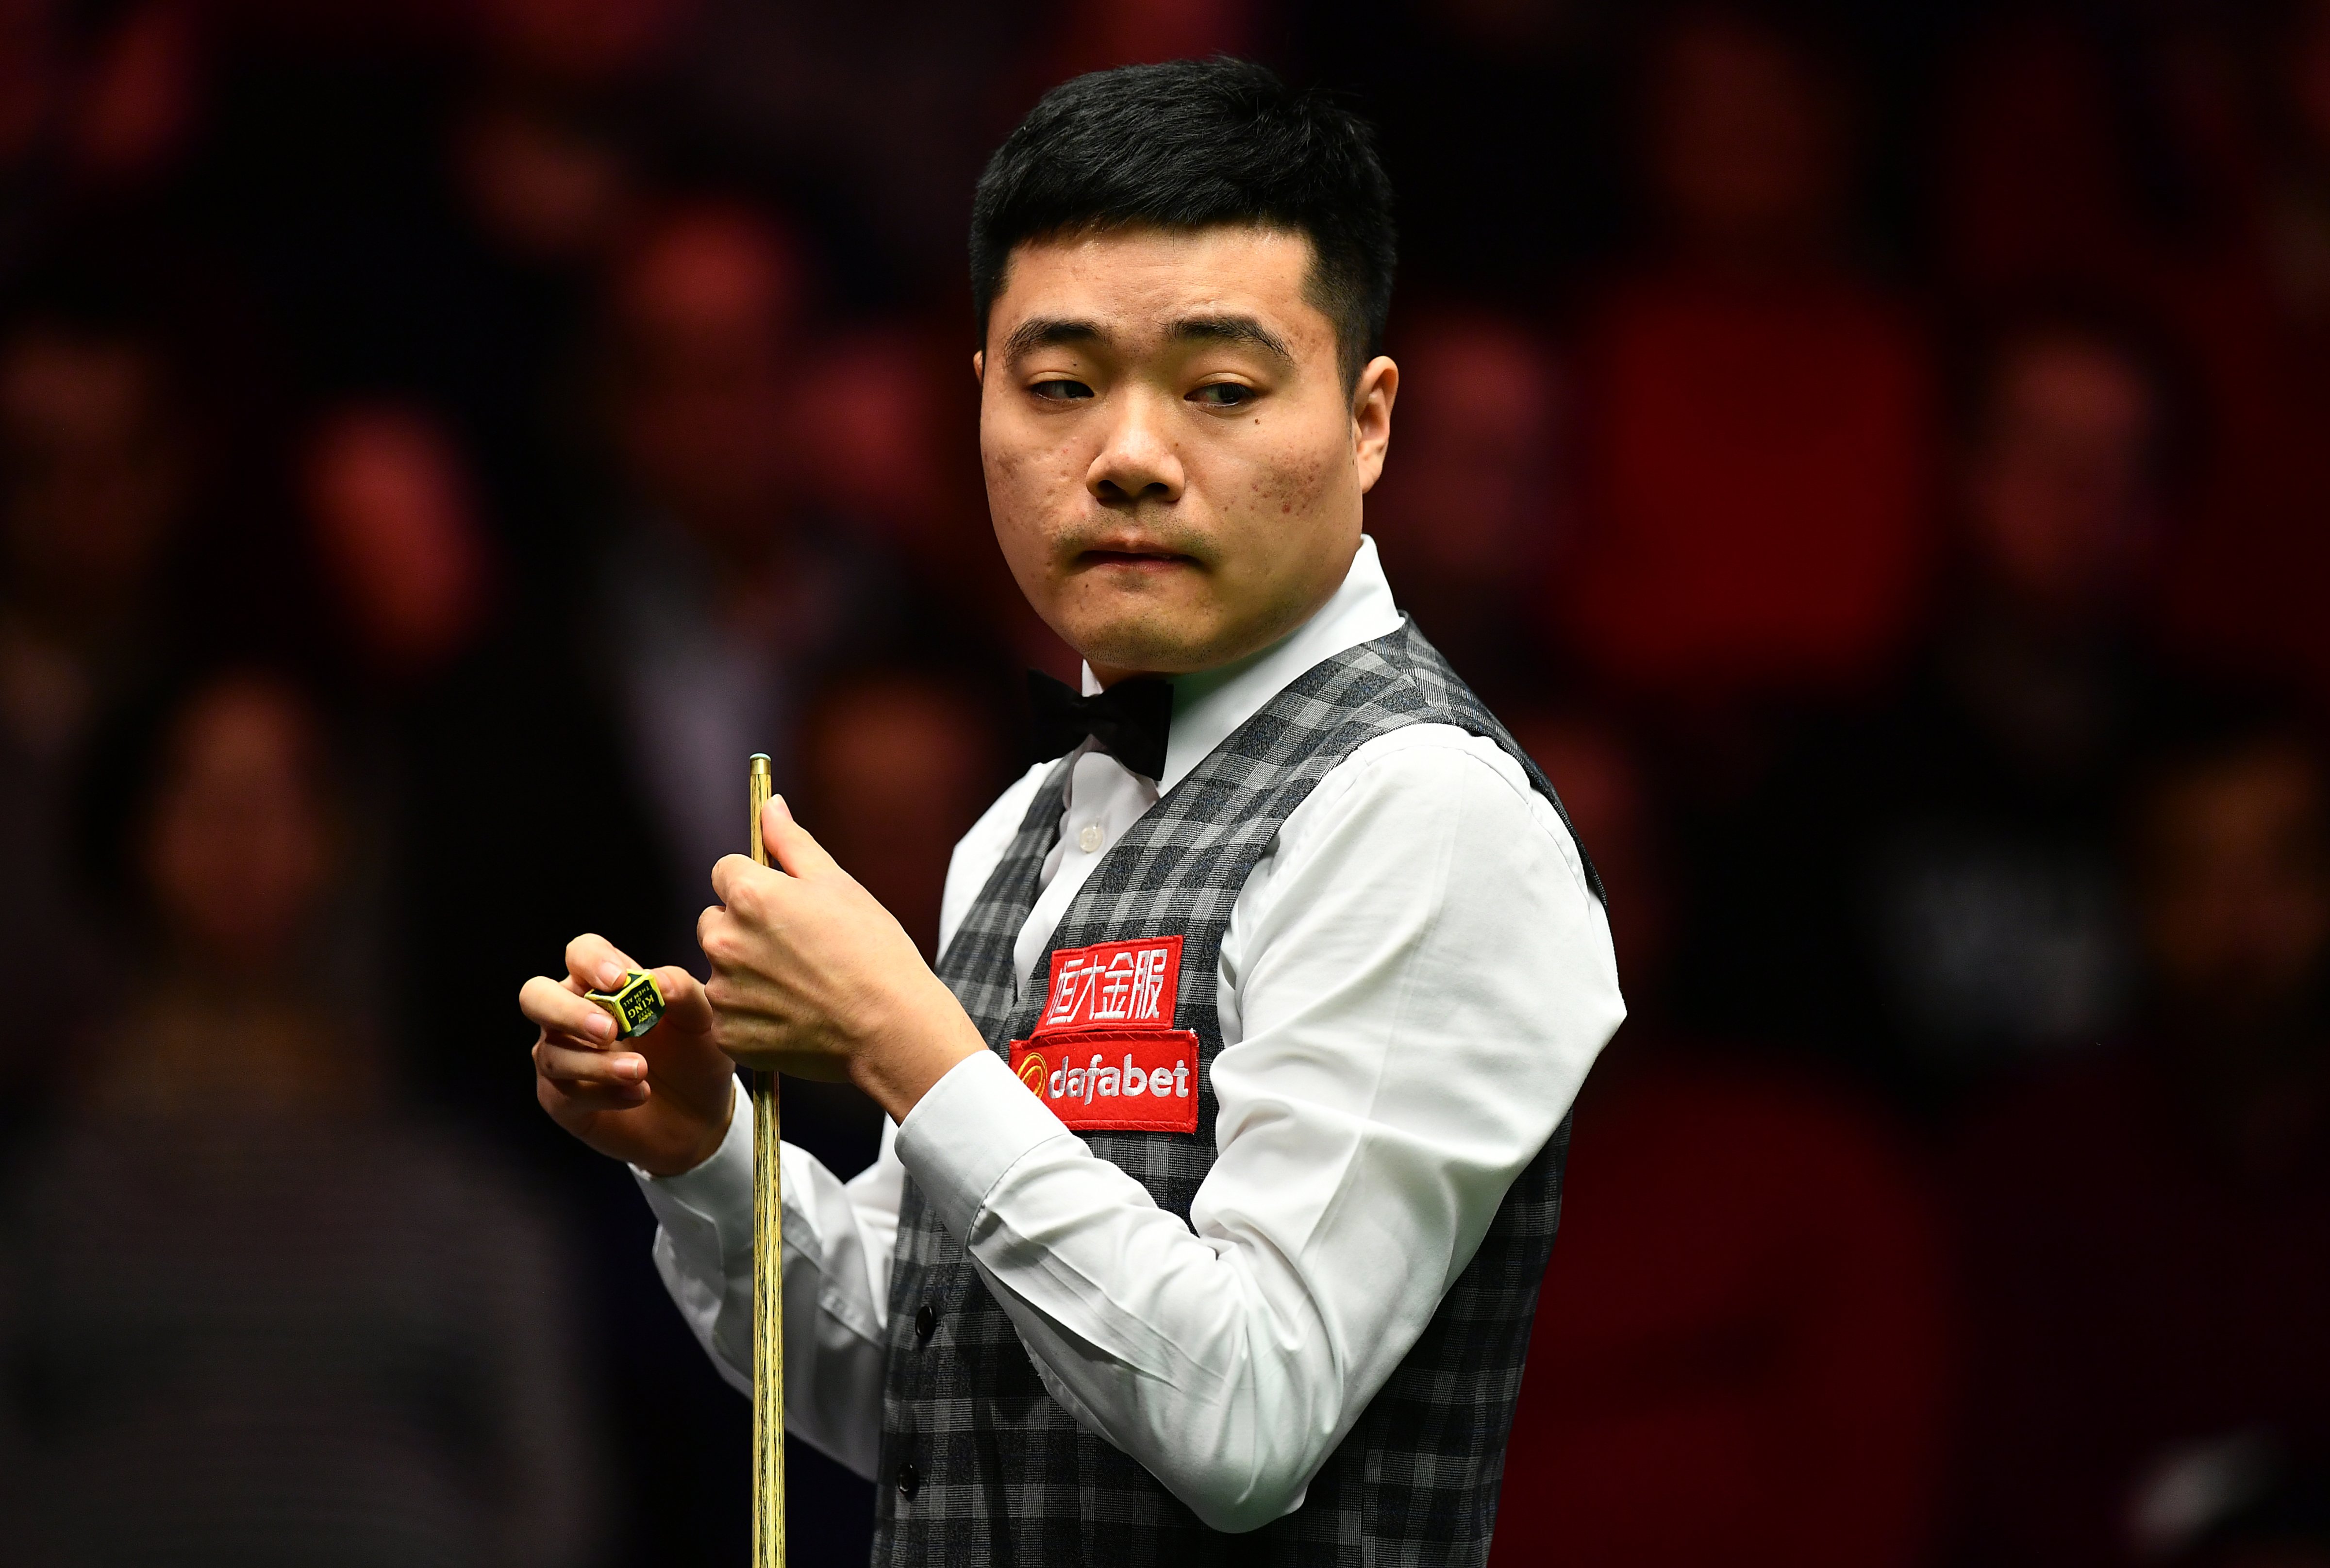 Ding Junhui of China looks on during his first round match against Kyren Wilson of England at the Dafabet Masters in London on Jan. 15, 2017. (Dan Mullan—Getty Images)